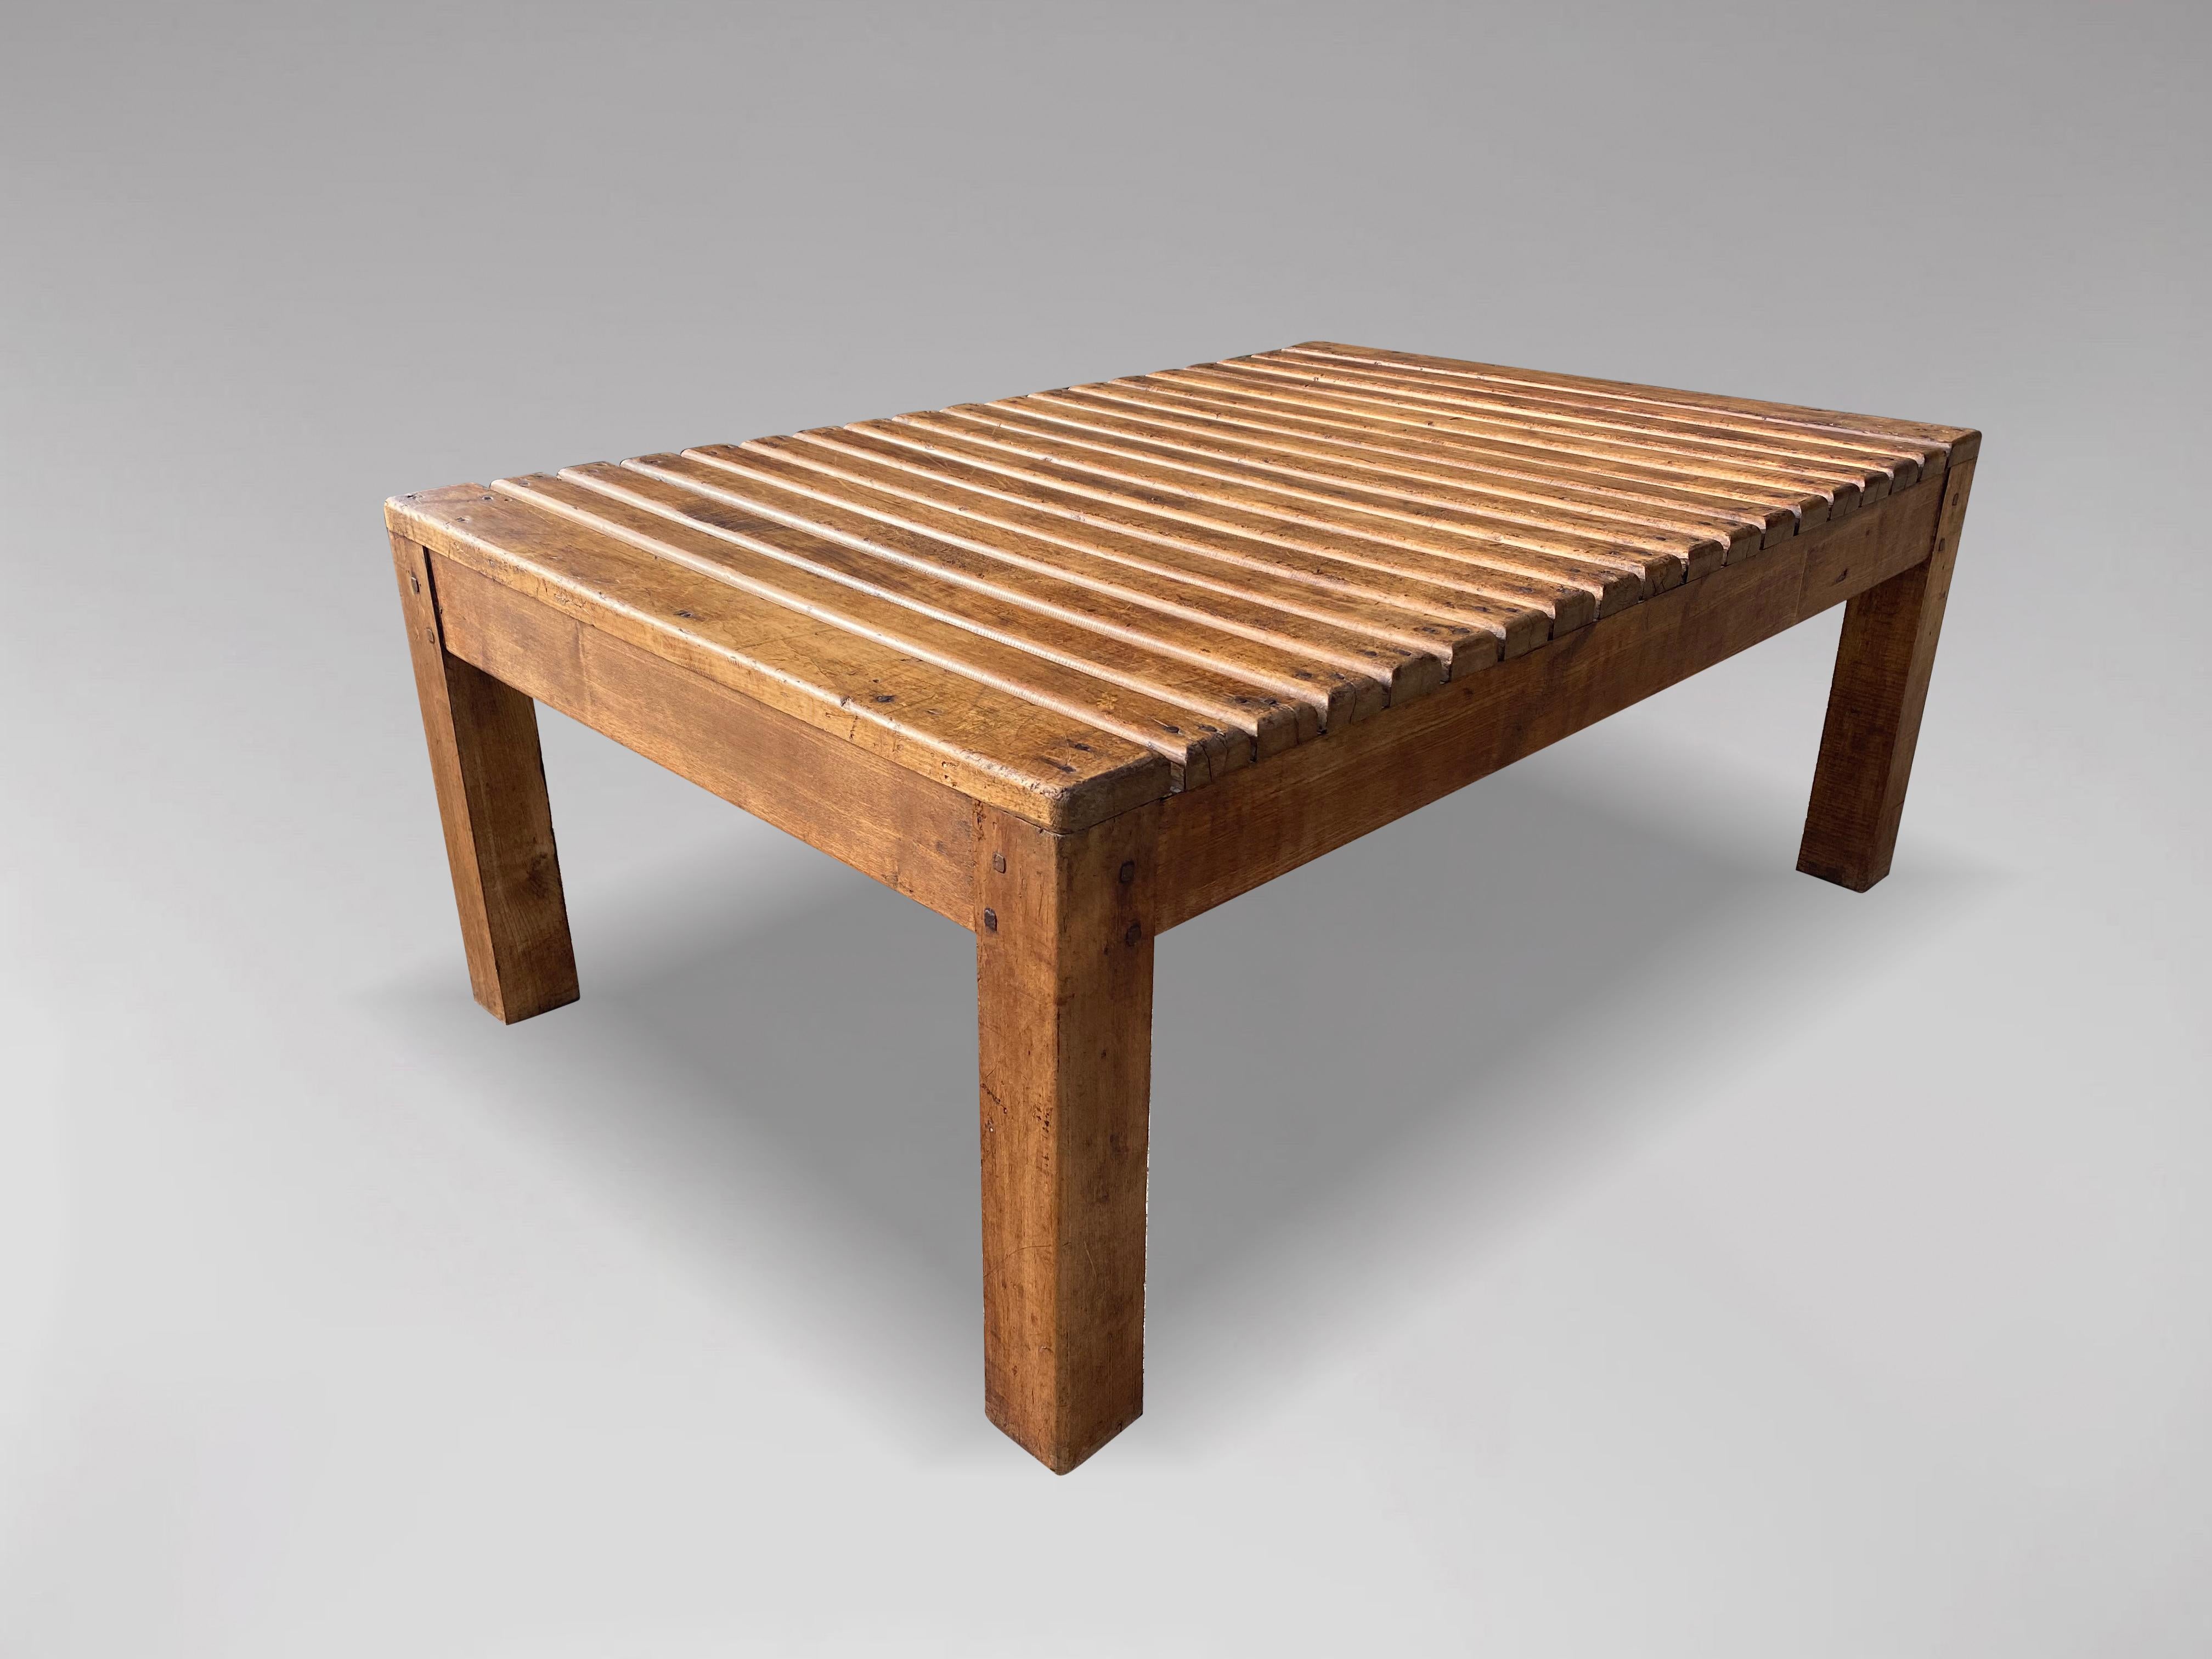 20th Century French Walnut Slat Top Coffee Table In Good Condition For Sale In Petworth,West Sussex, GB